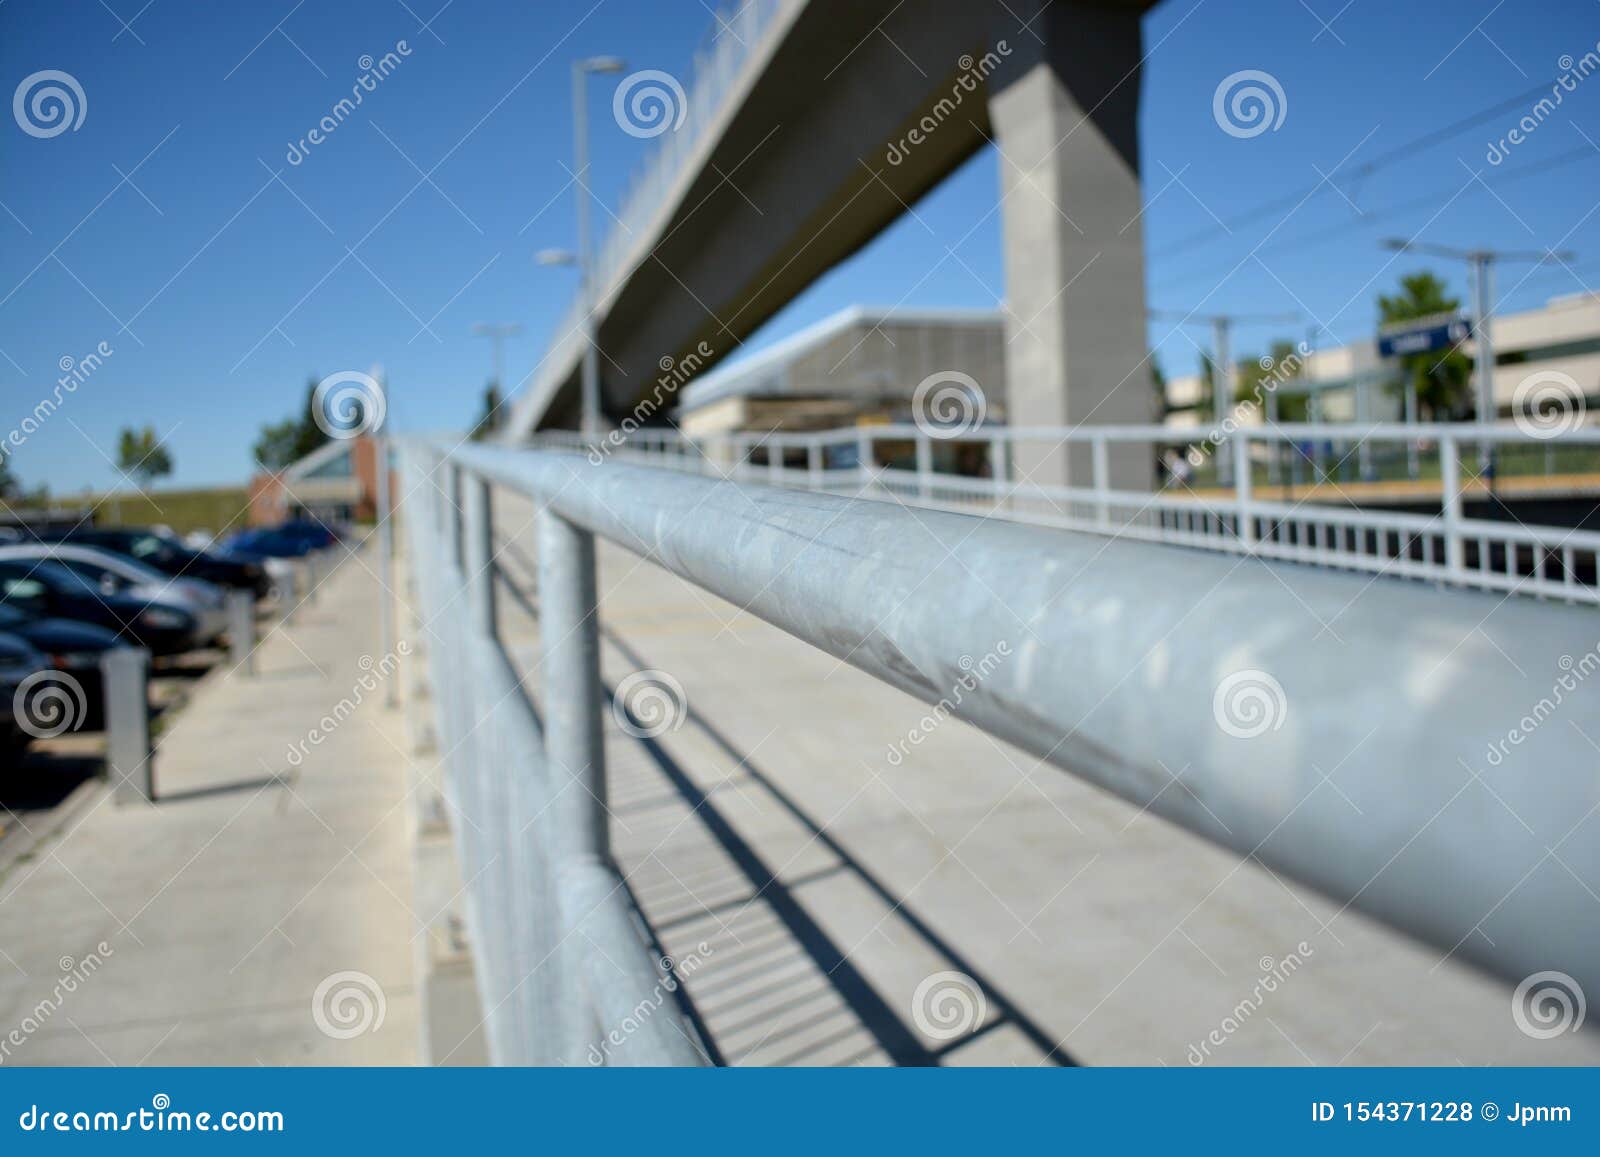 Pedestrian Walkway by Train Track Line at City Station Stock Photo ...